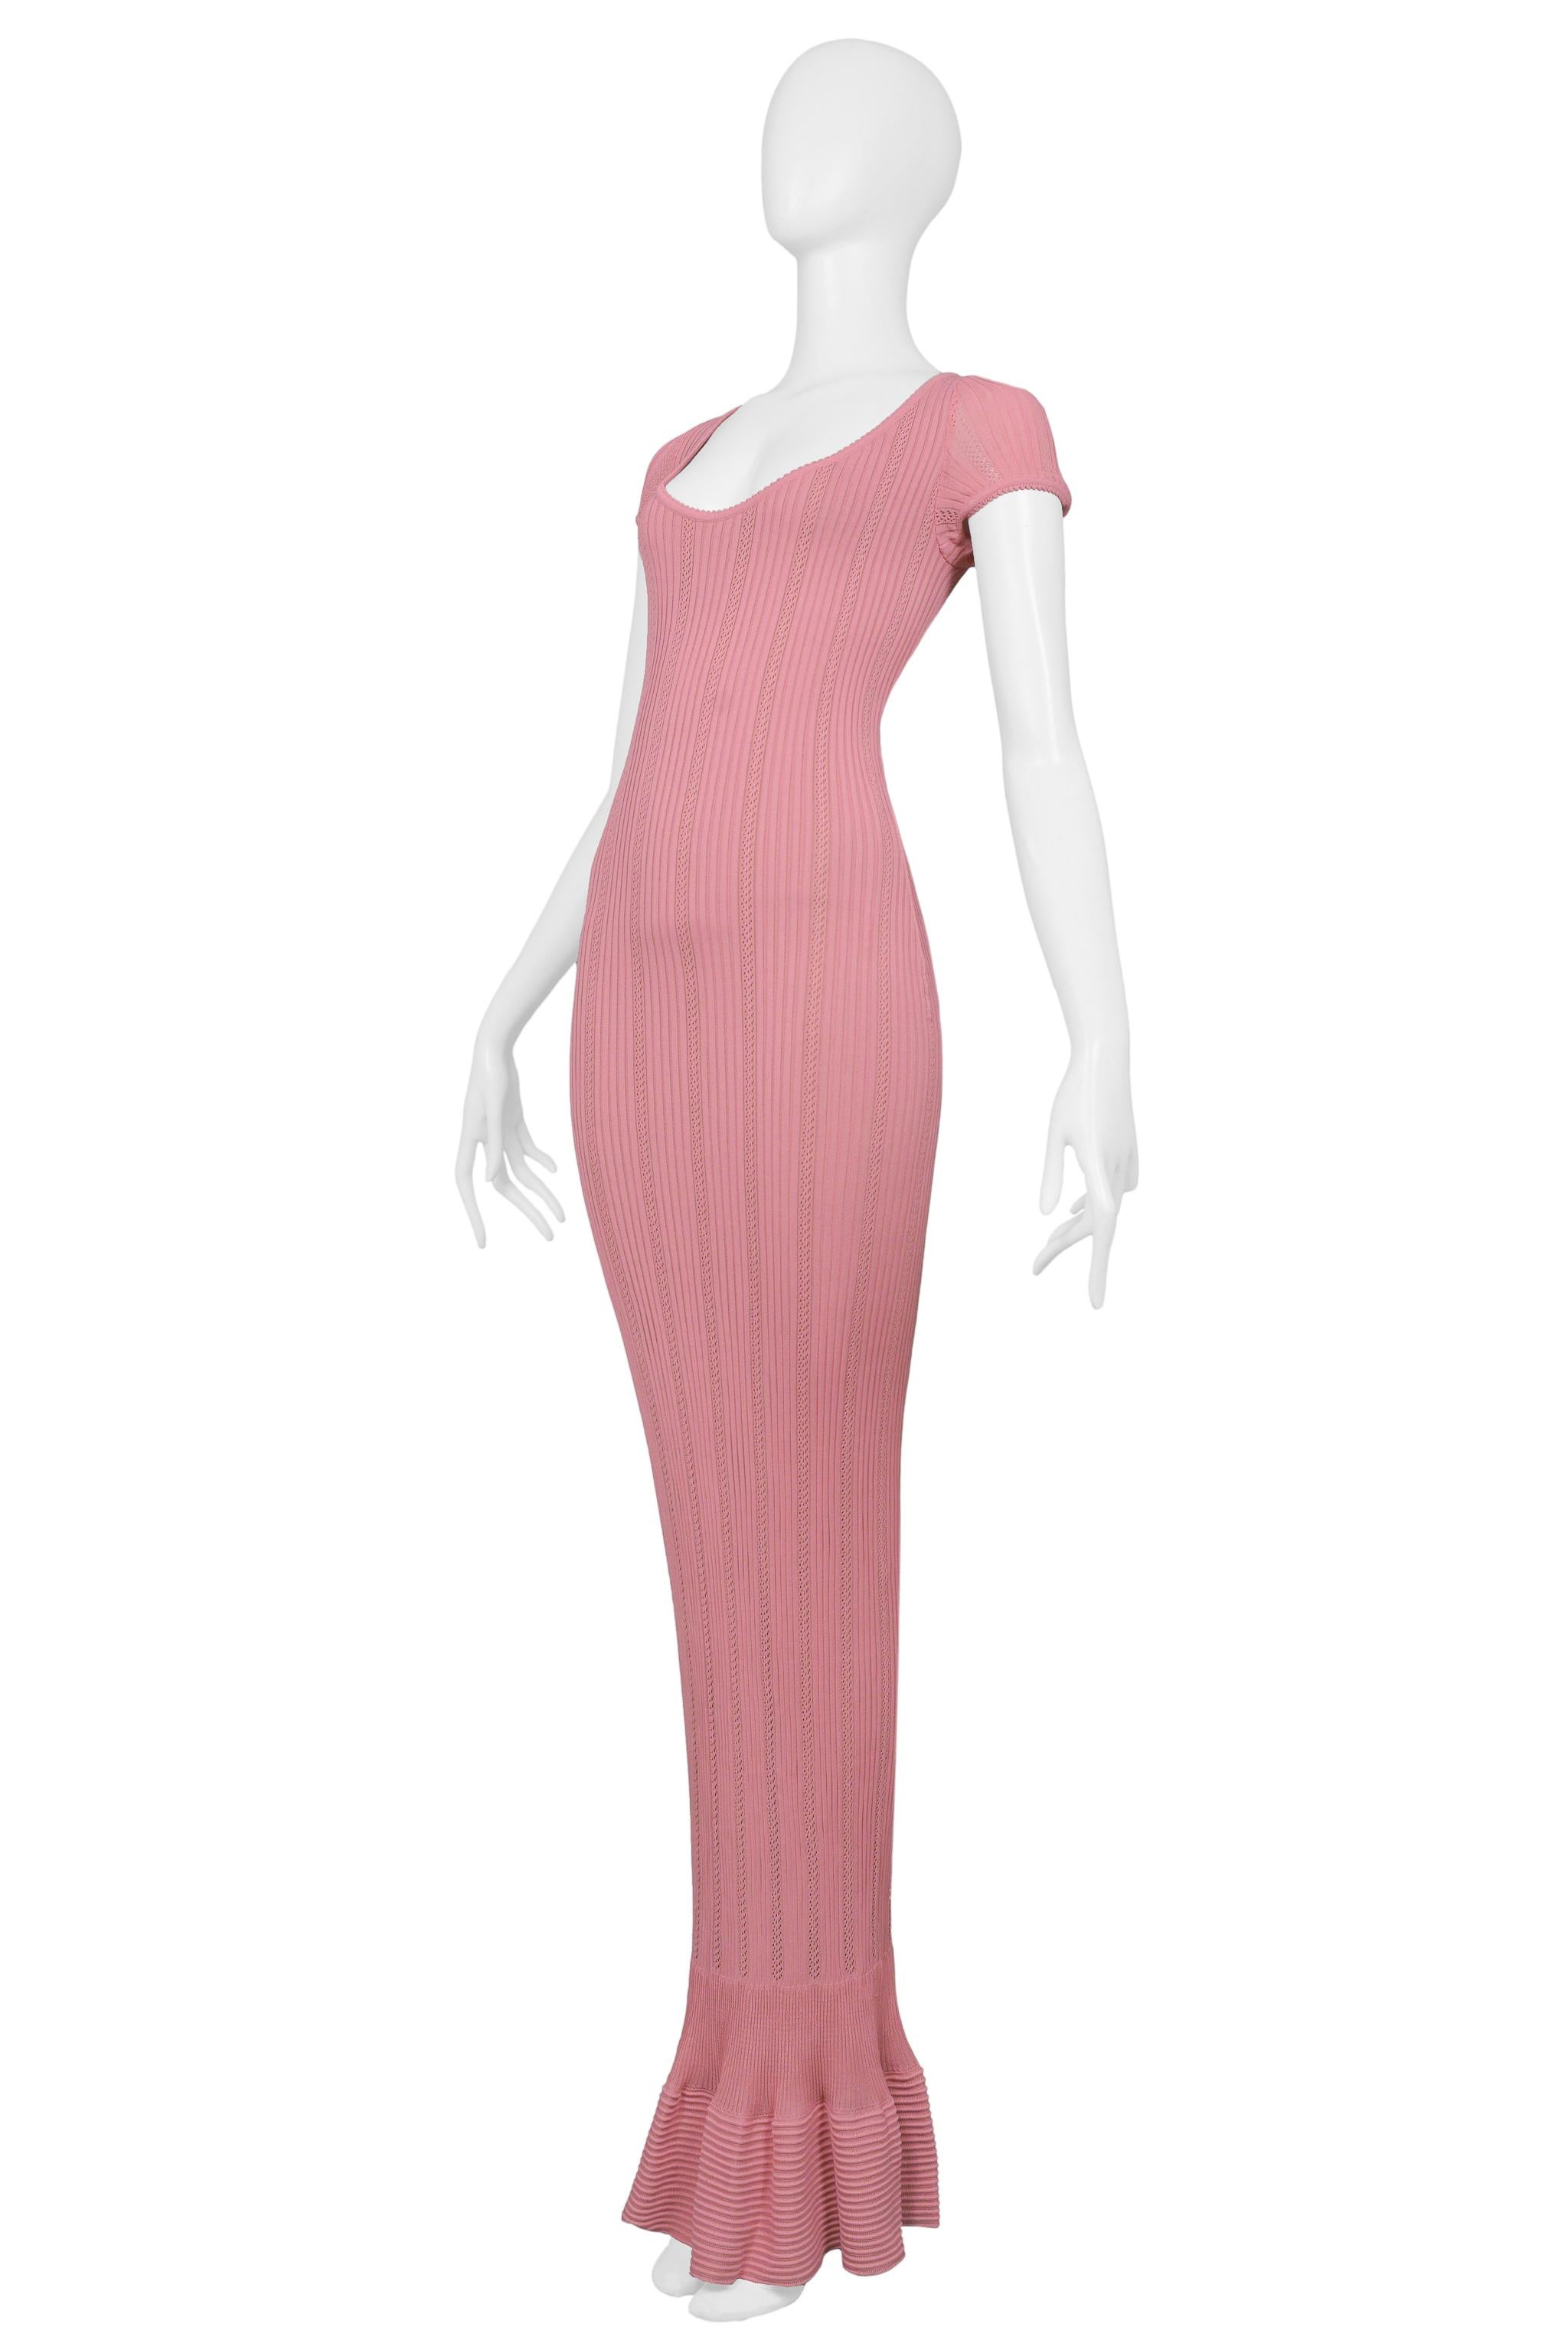 Women's Alaia Pink Knit Bodycon Mermaid Dress SS 1996 For Sale